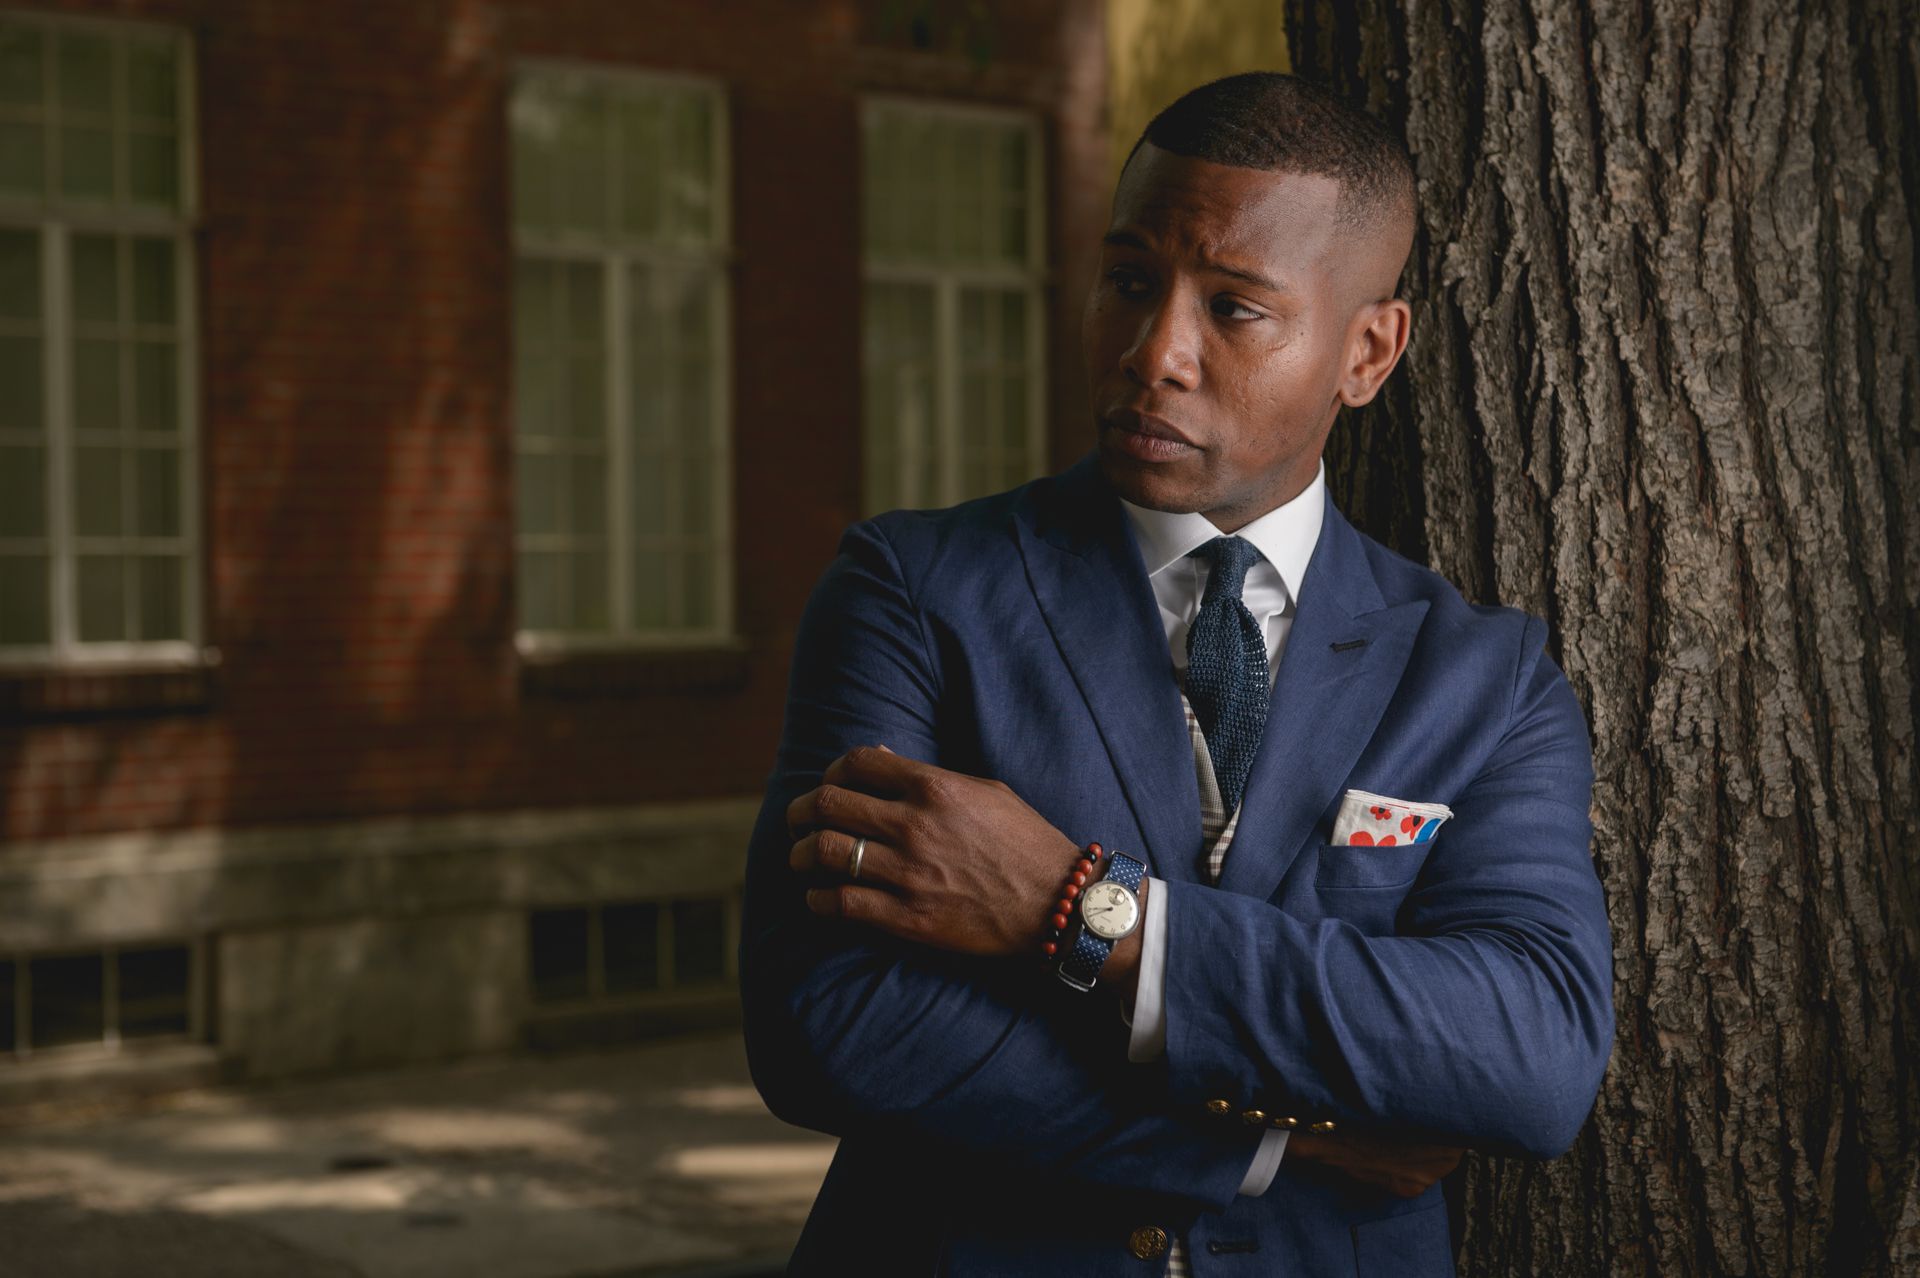 Why some American black men are dressing in suits to survive